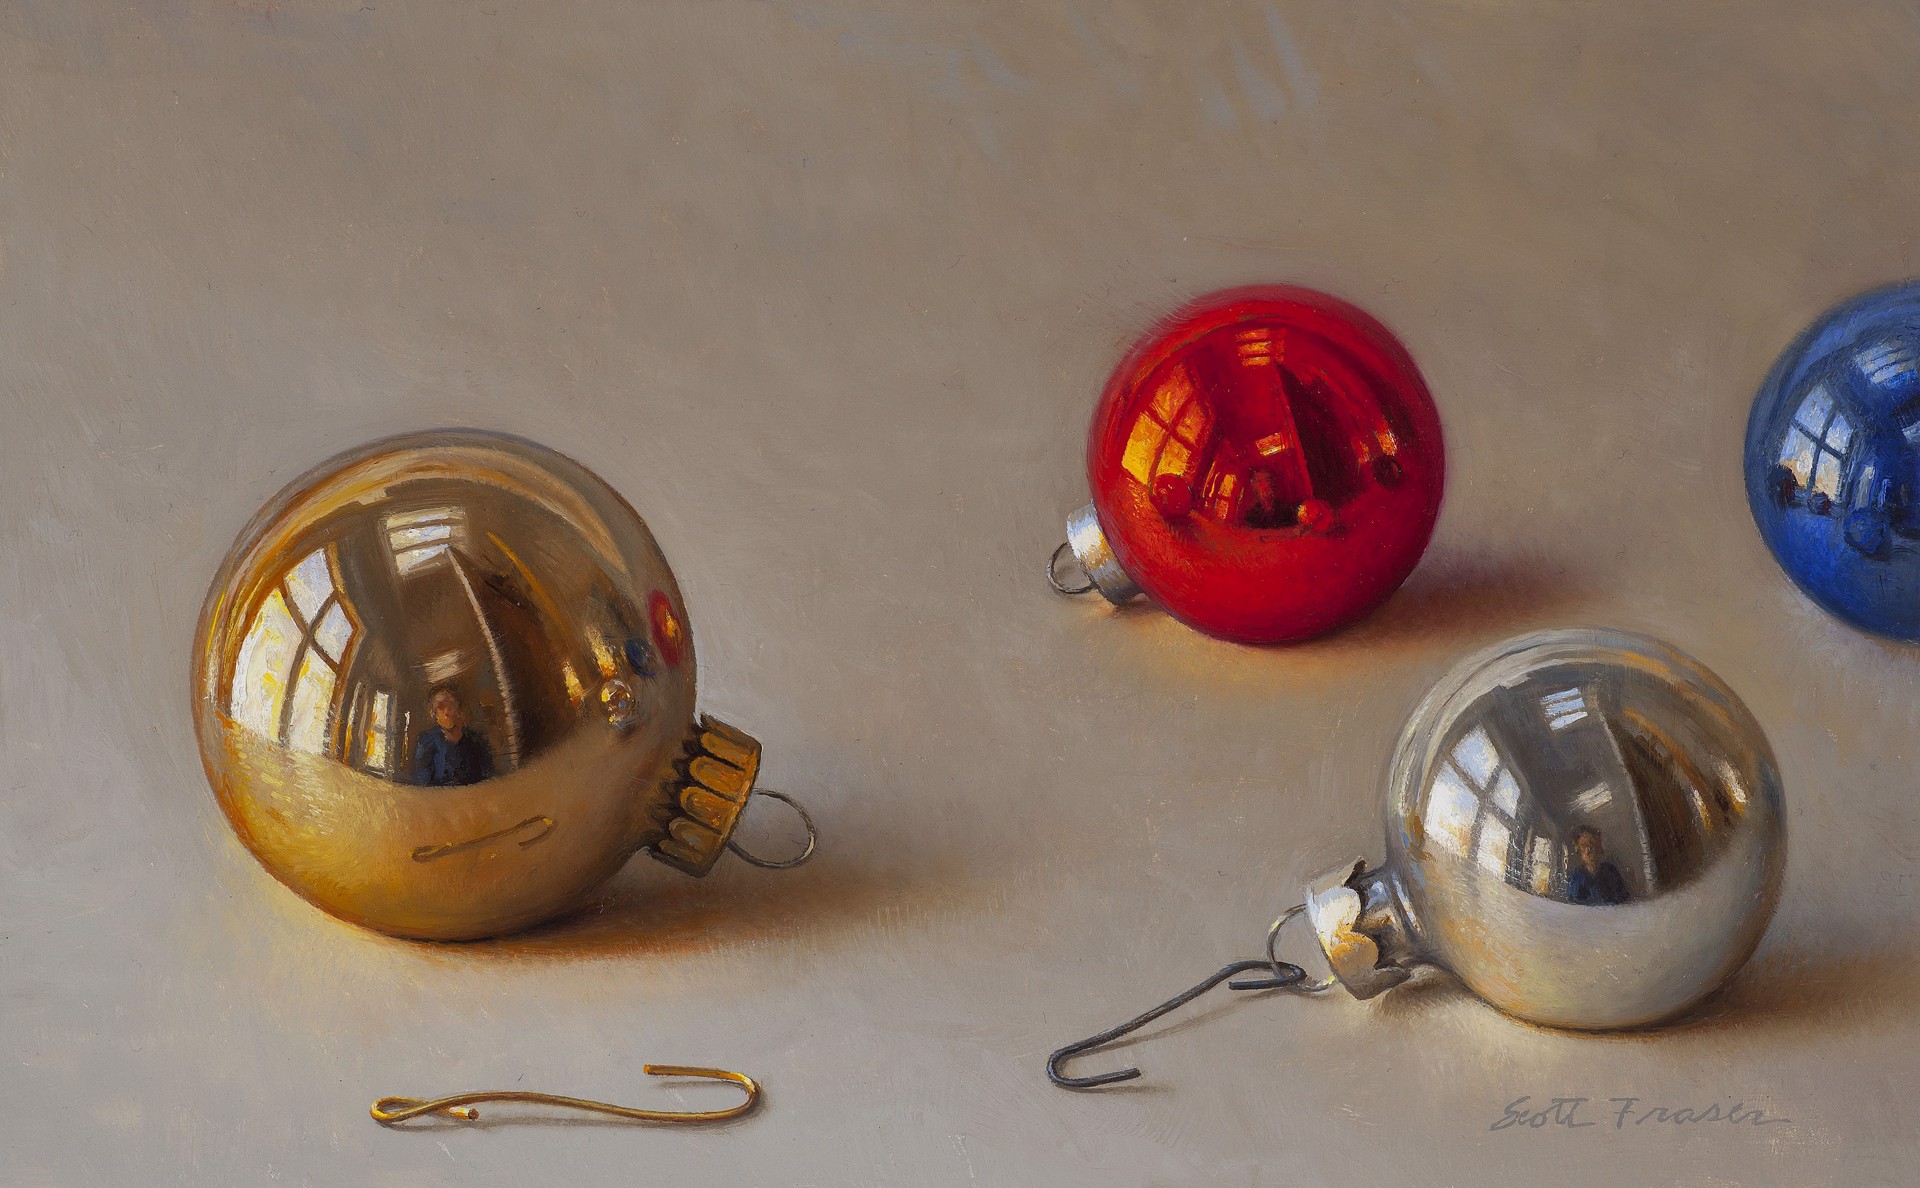 Four Ornaments by Scott Fraser